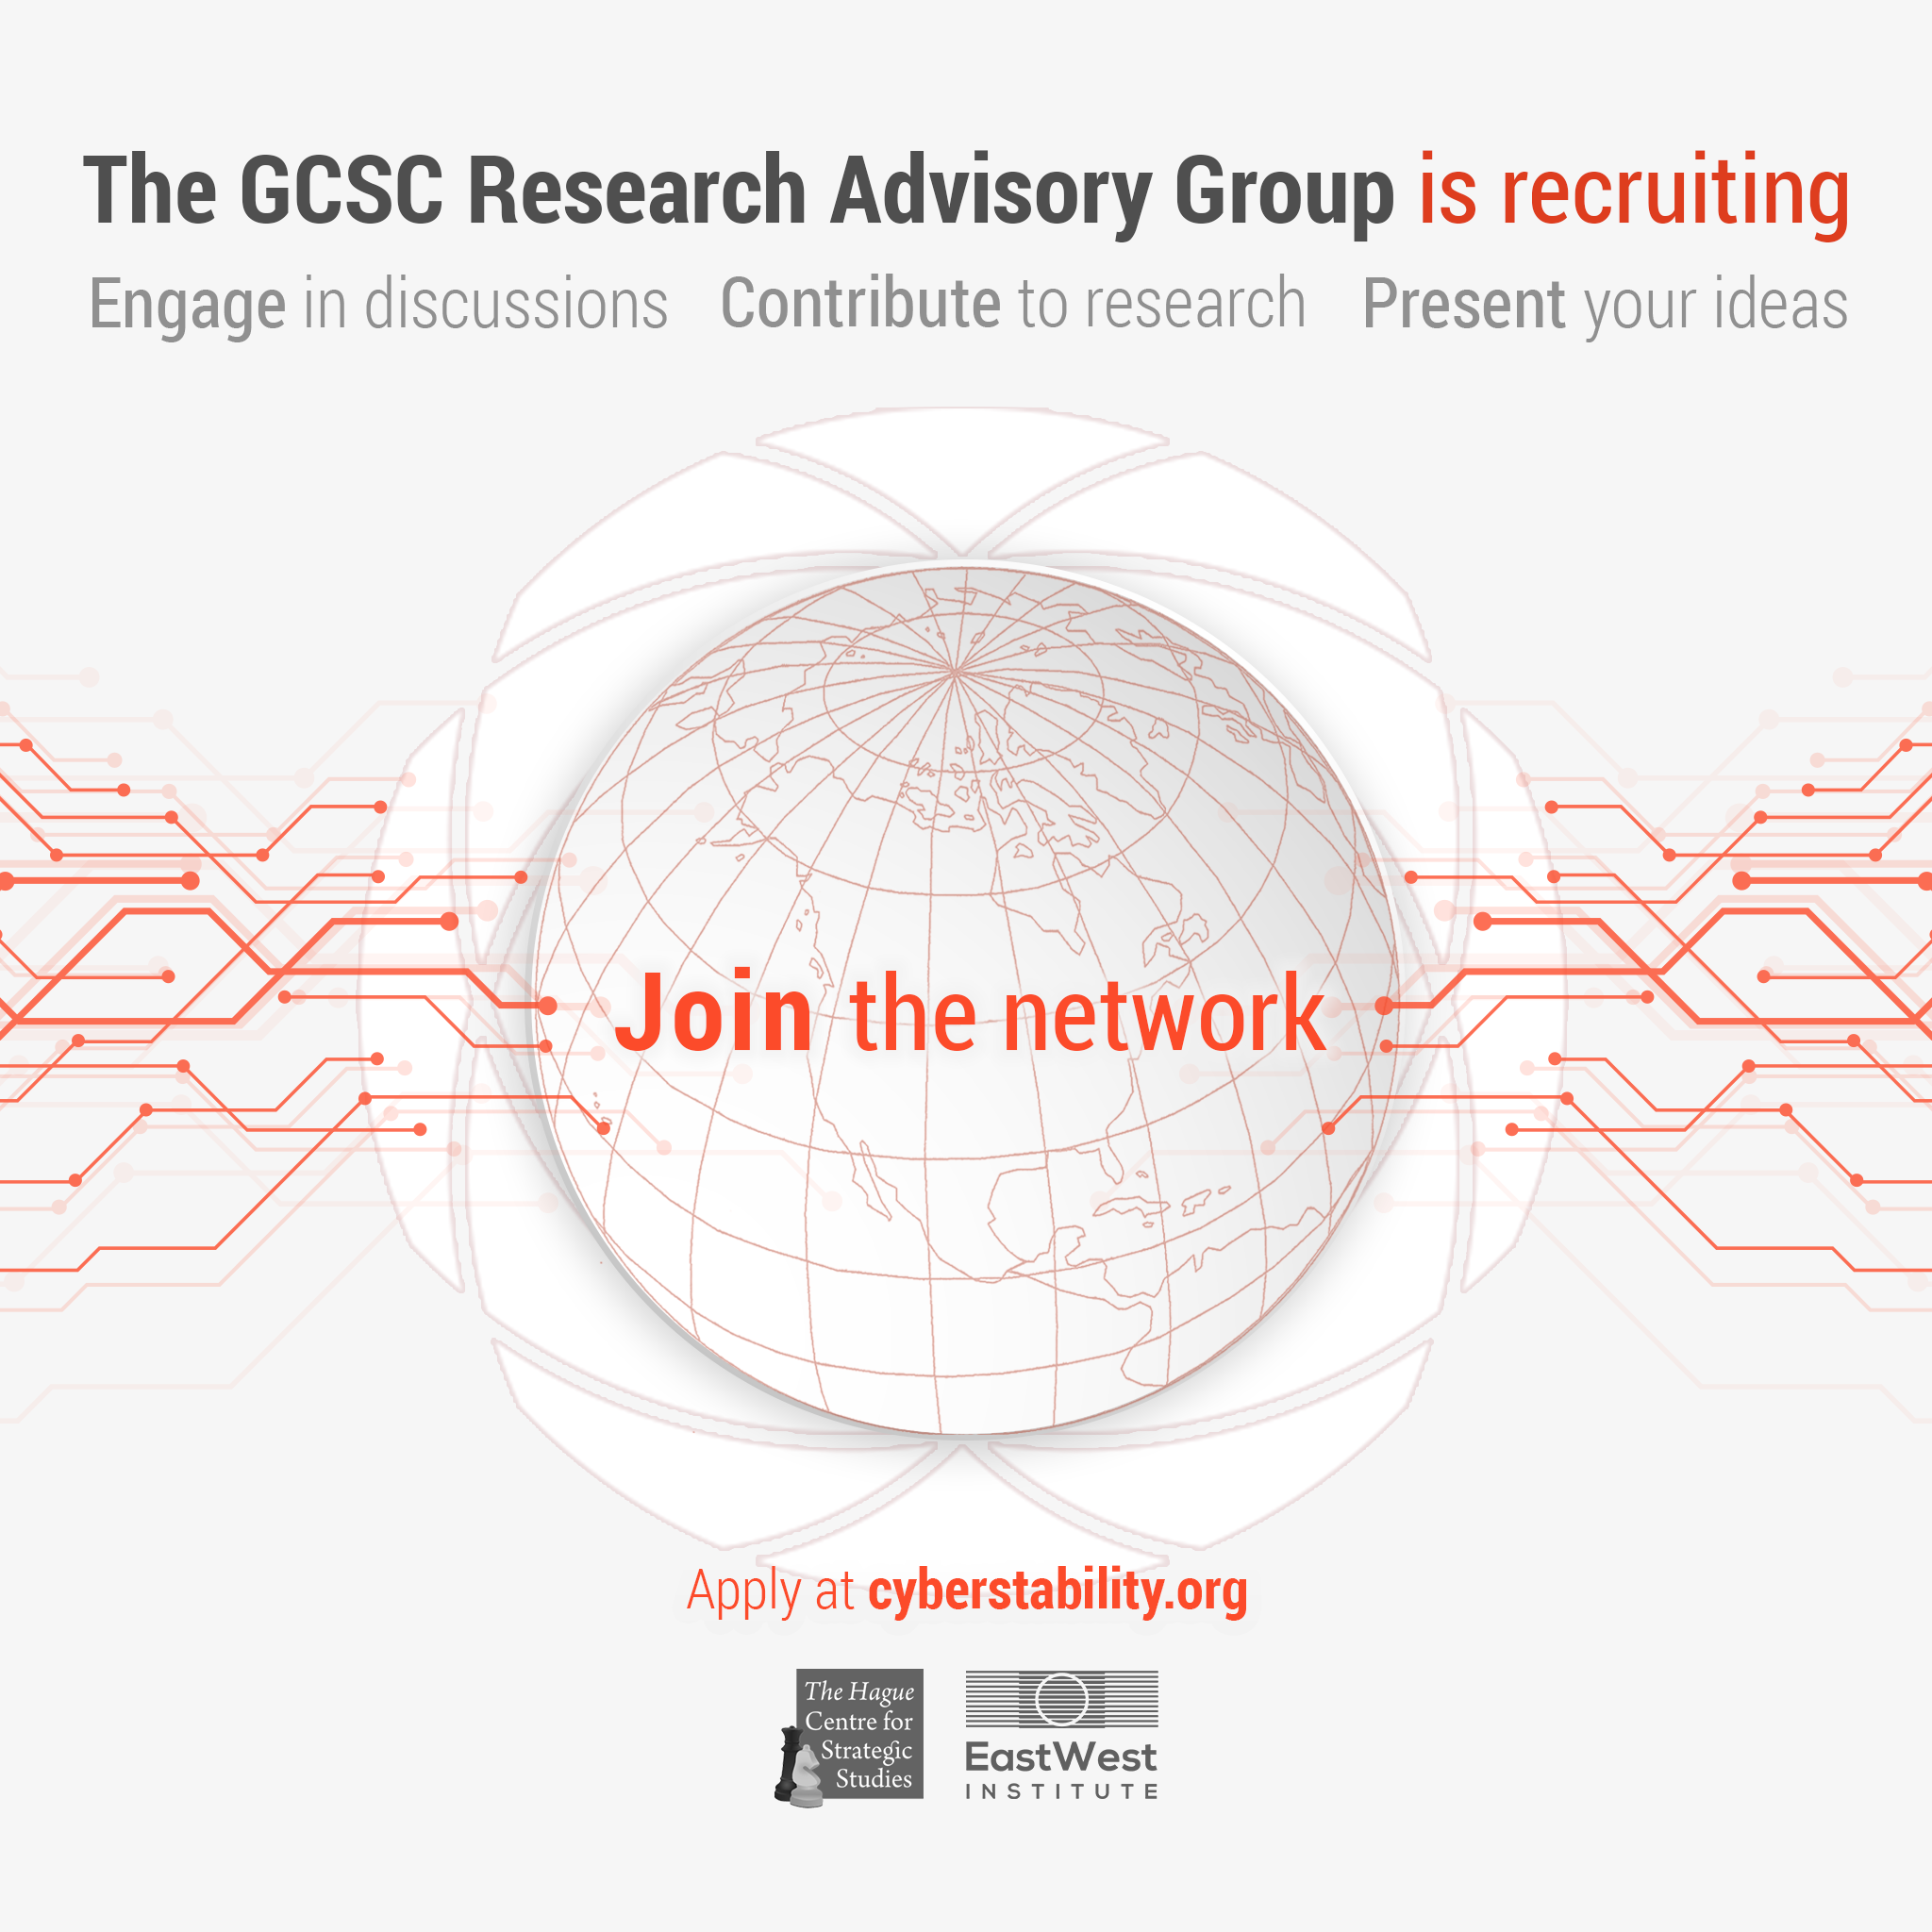 The GCSC Research Advisory Group is recruiting